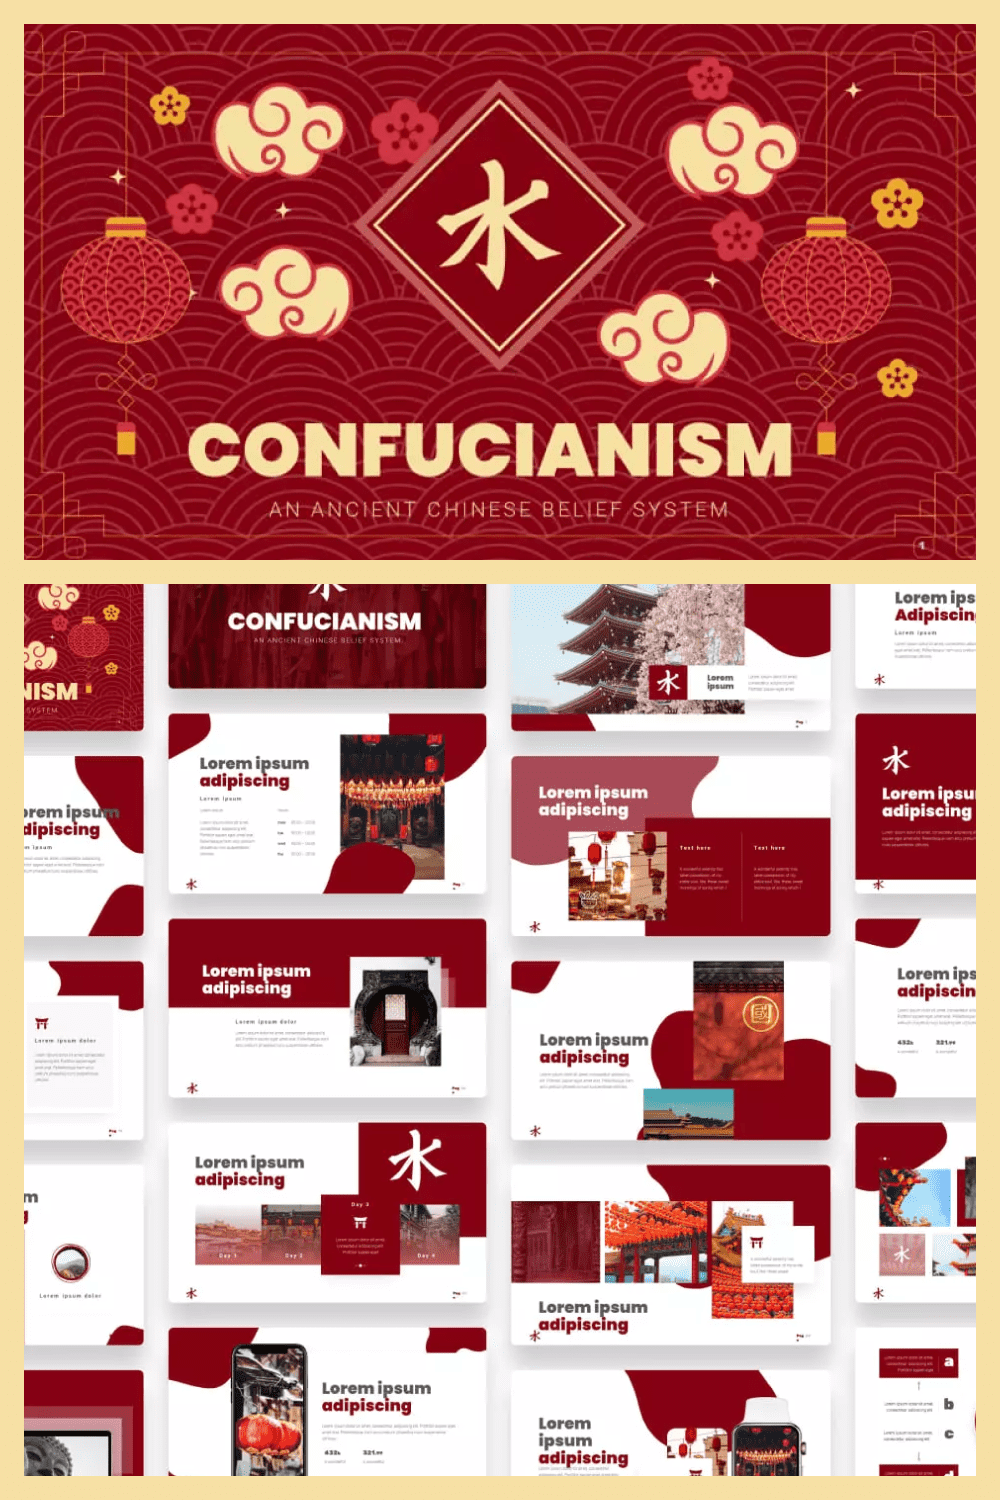 Screenshots of pages in red colors on the theme of Confucianism.